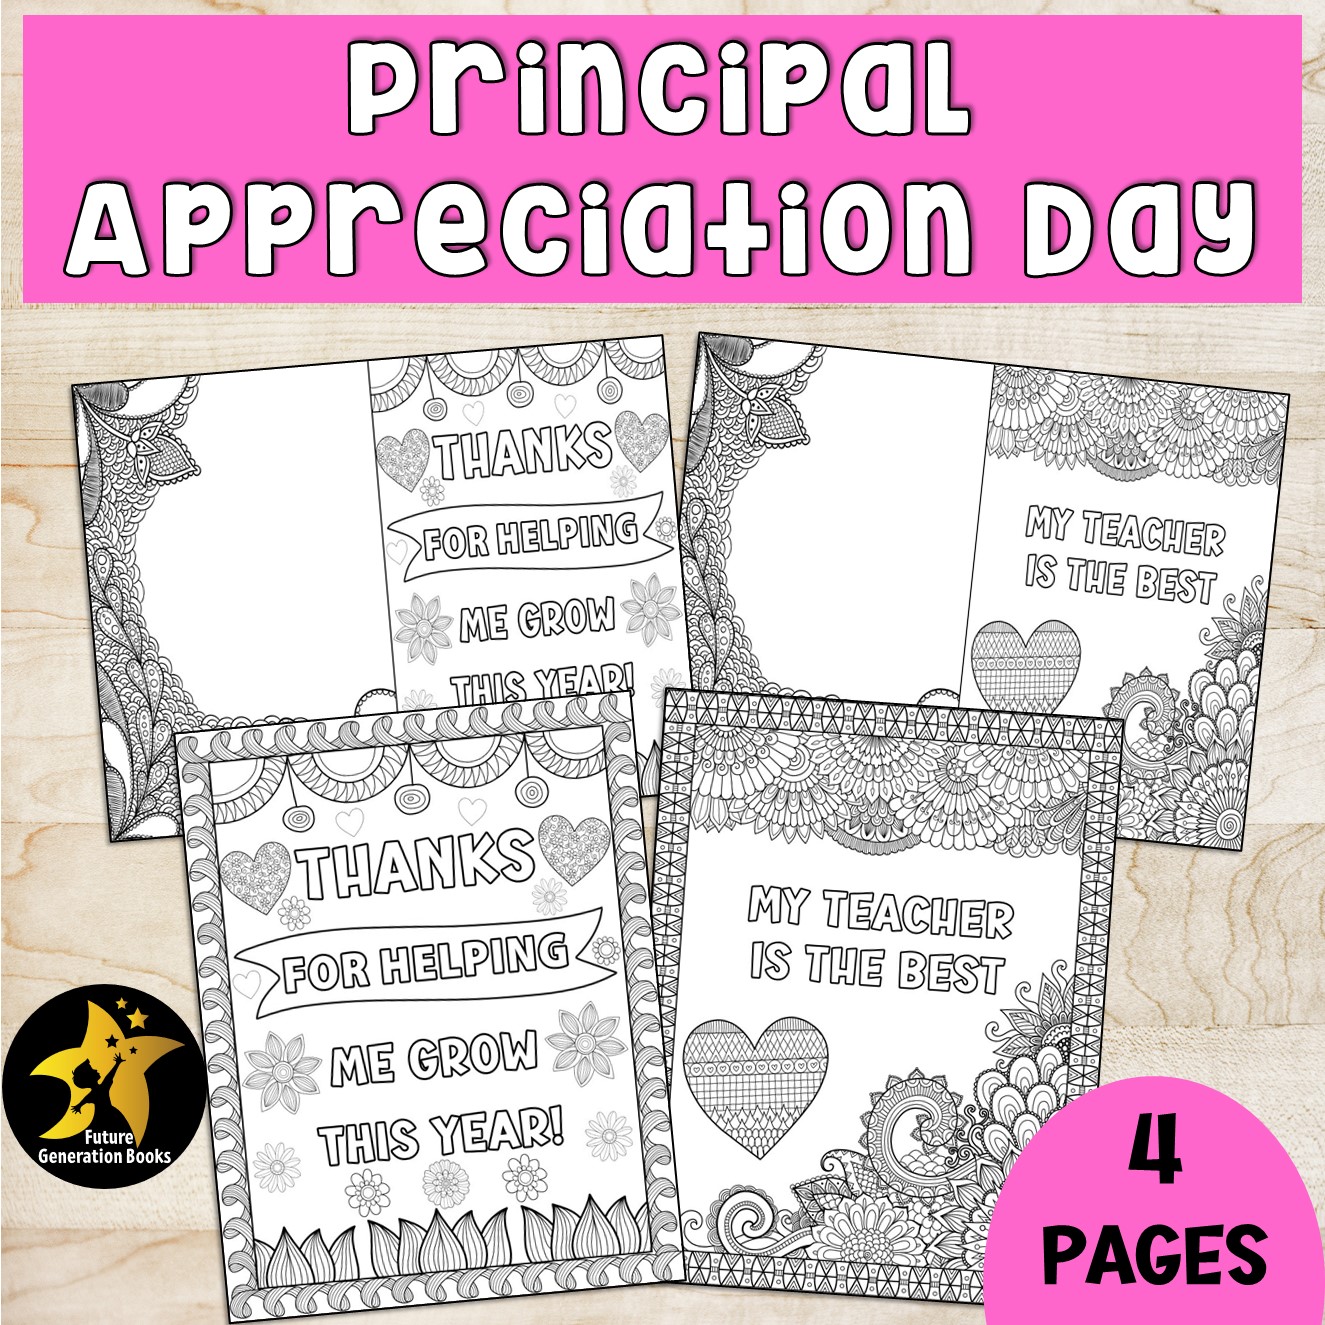 Principal appreciation day cards thank you notes zen doodle coloring pages gift made by teachers